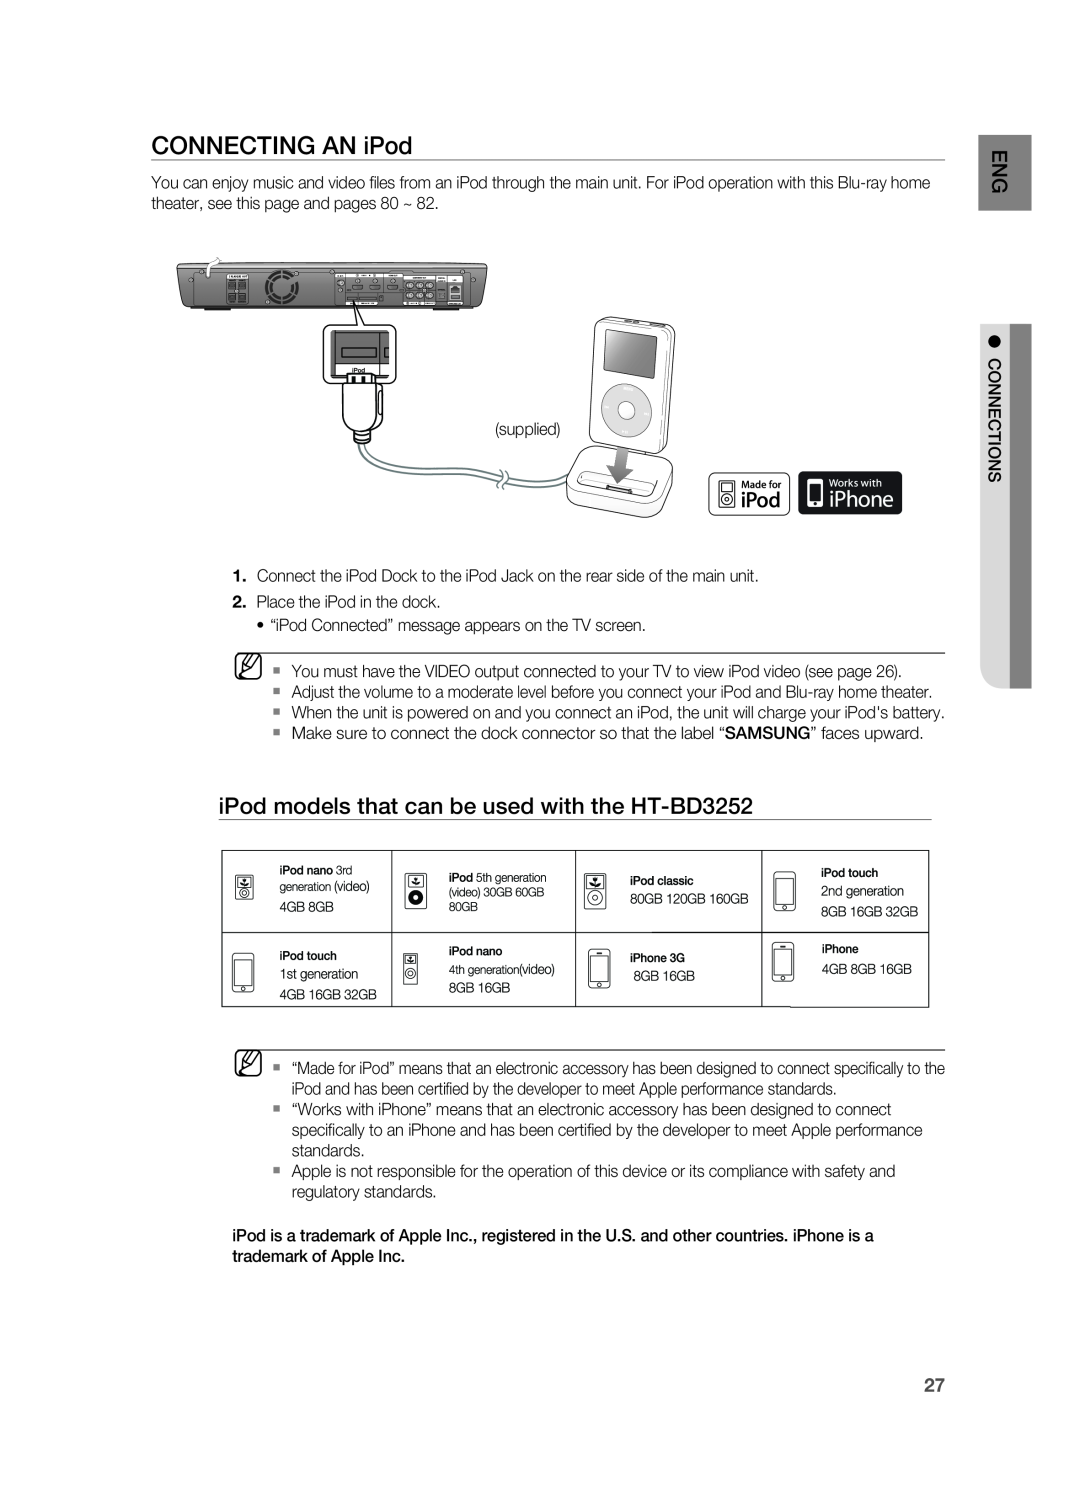 Samsung user manual CONNECTING AN iPod, iPod models that can be used with the HT-BD3252 